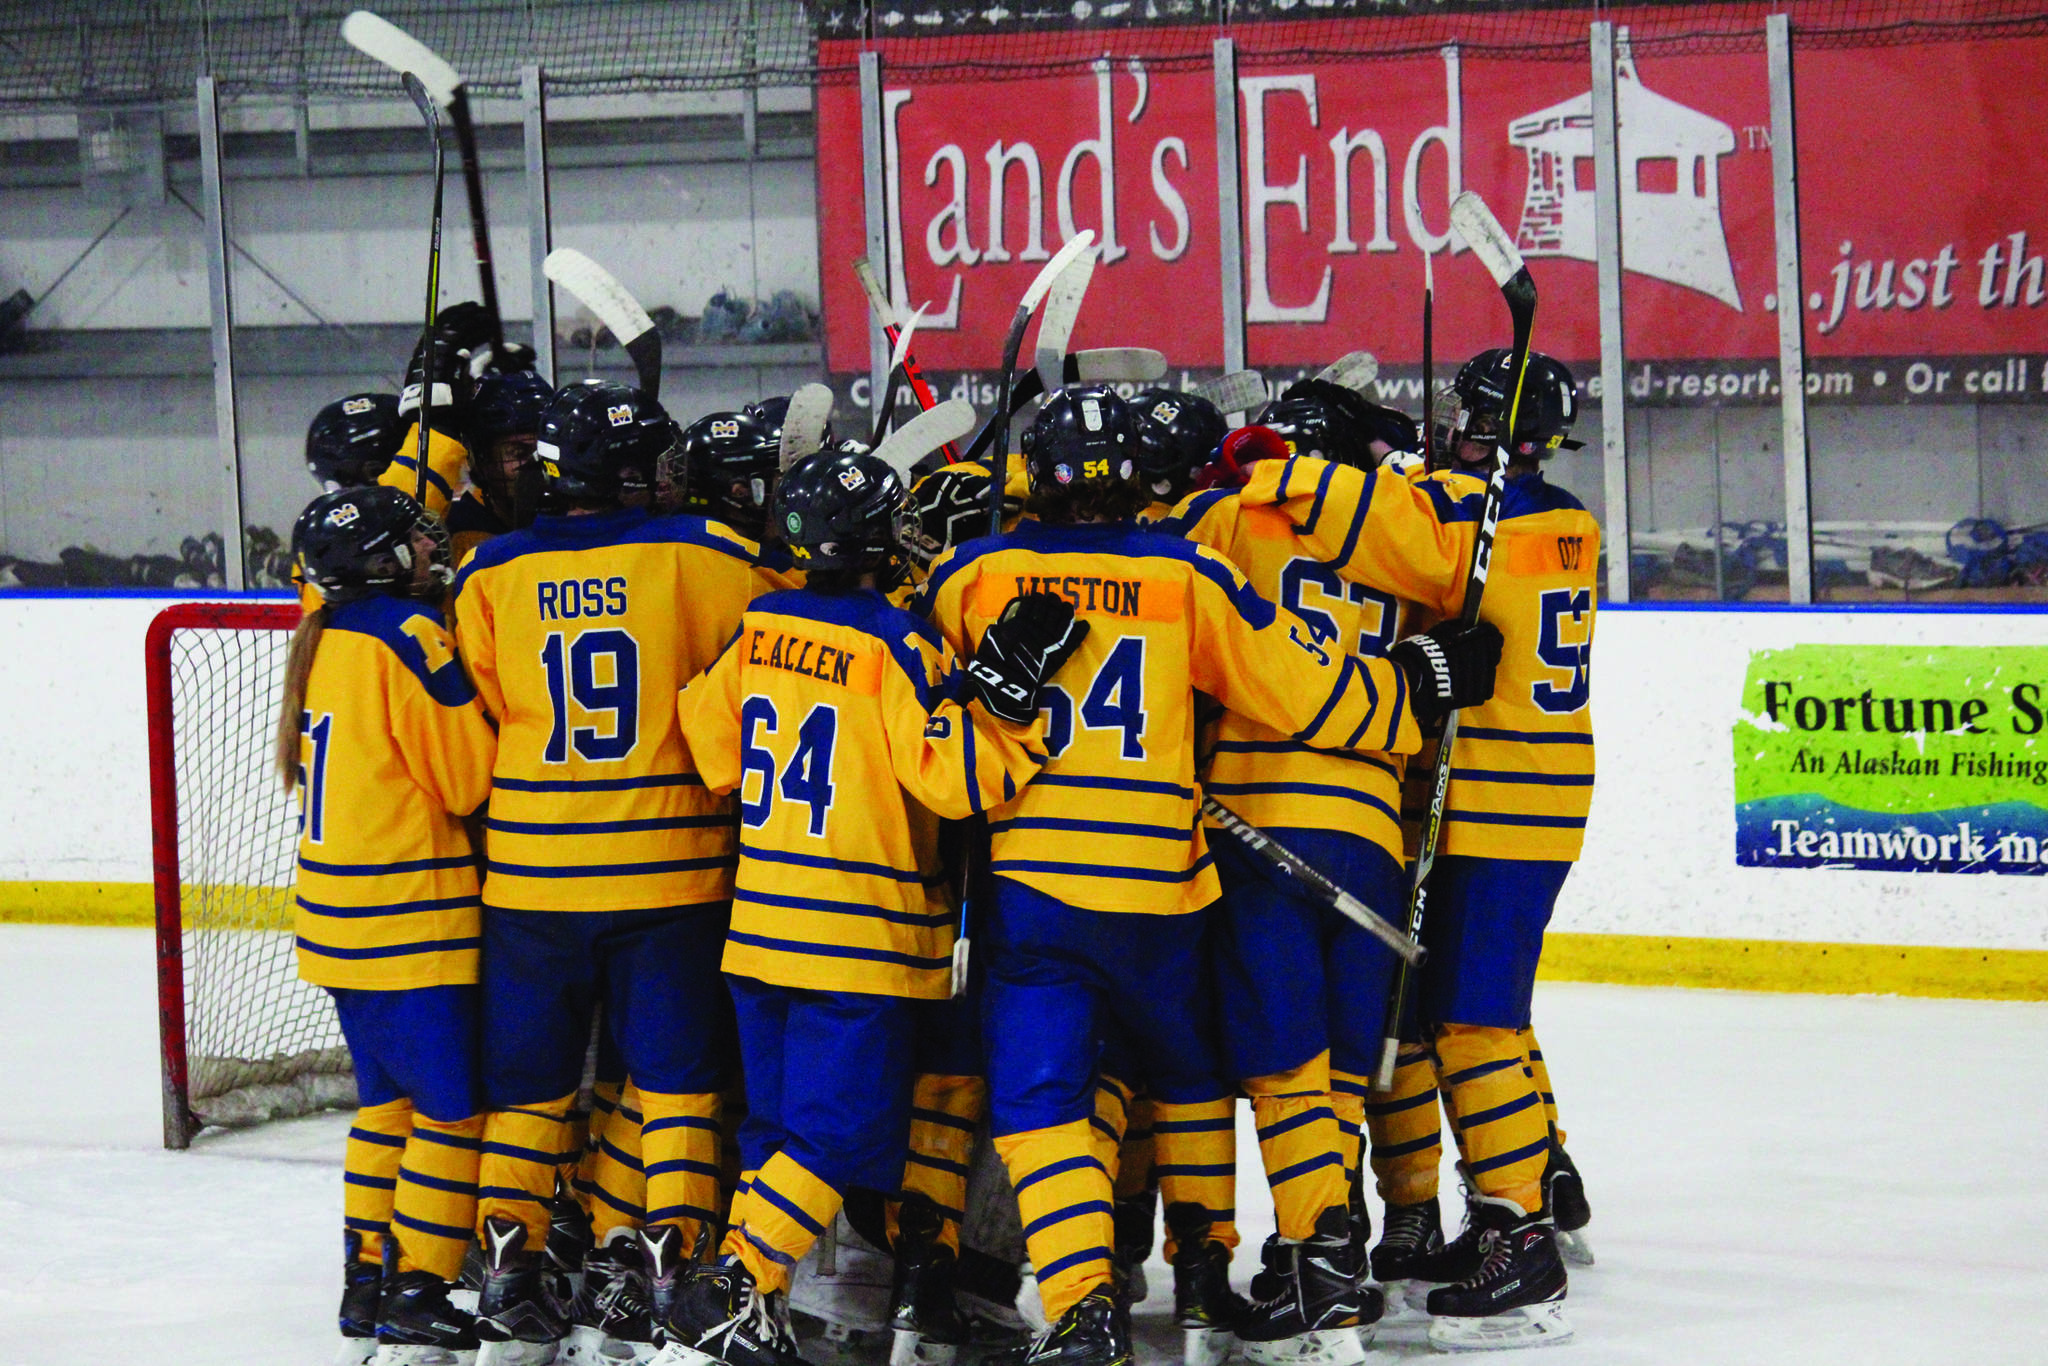 Members of the Homer hockey team swarm goalkeeper Rhodes Turner in celebration after their 7-5 loss to Colony High School on Friday, Jan. 10, 2020 at Kevin Bell Arena in Homer, Alaska. With goalie Keegan Strong out, Turner stepped in, suited up and played in the position for the very first time in a varsity game. (Photo by Megan Pacer/Homer News)